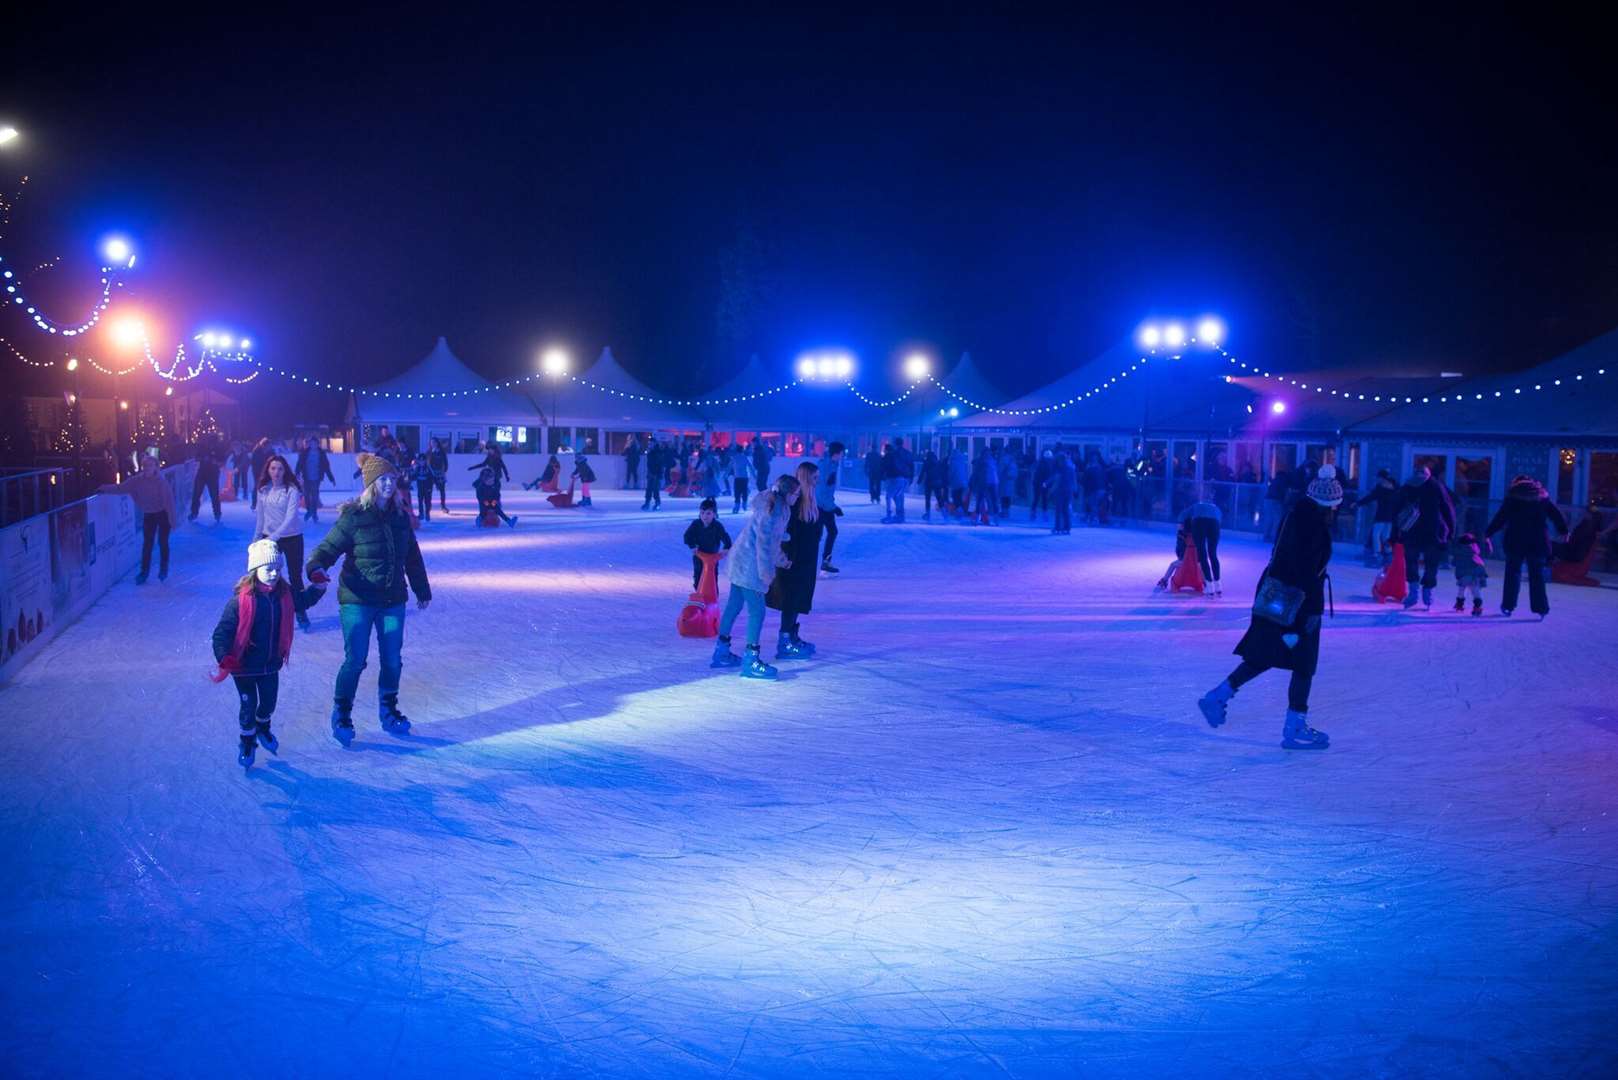 The ice rink at Tunbridge Wells faces an uncertain future after rising costs